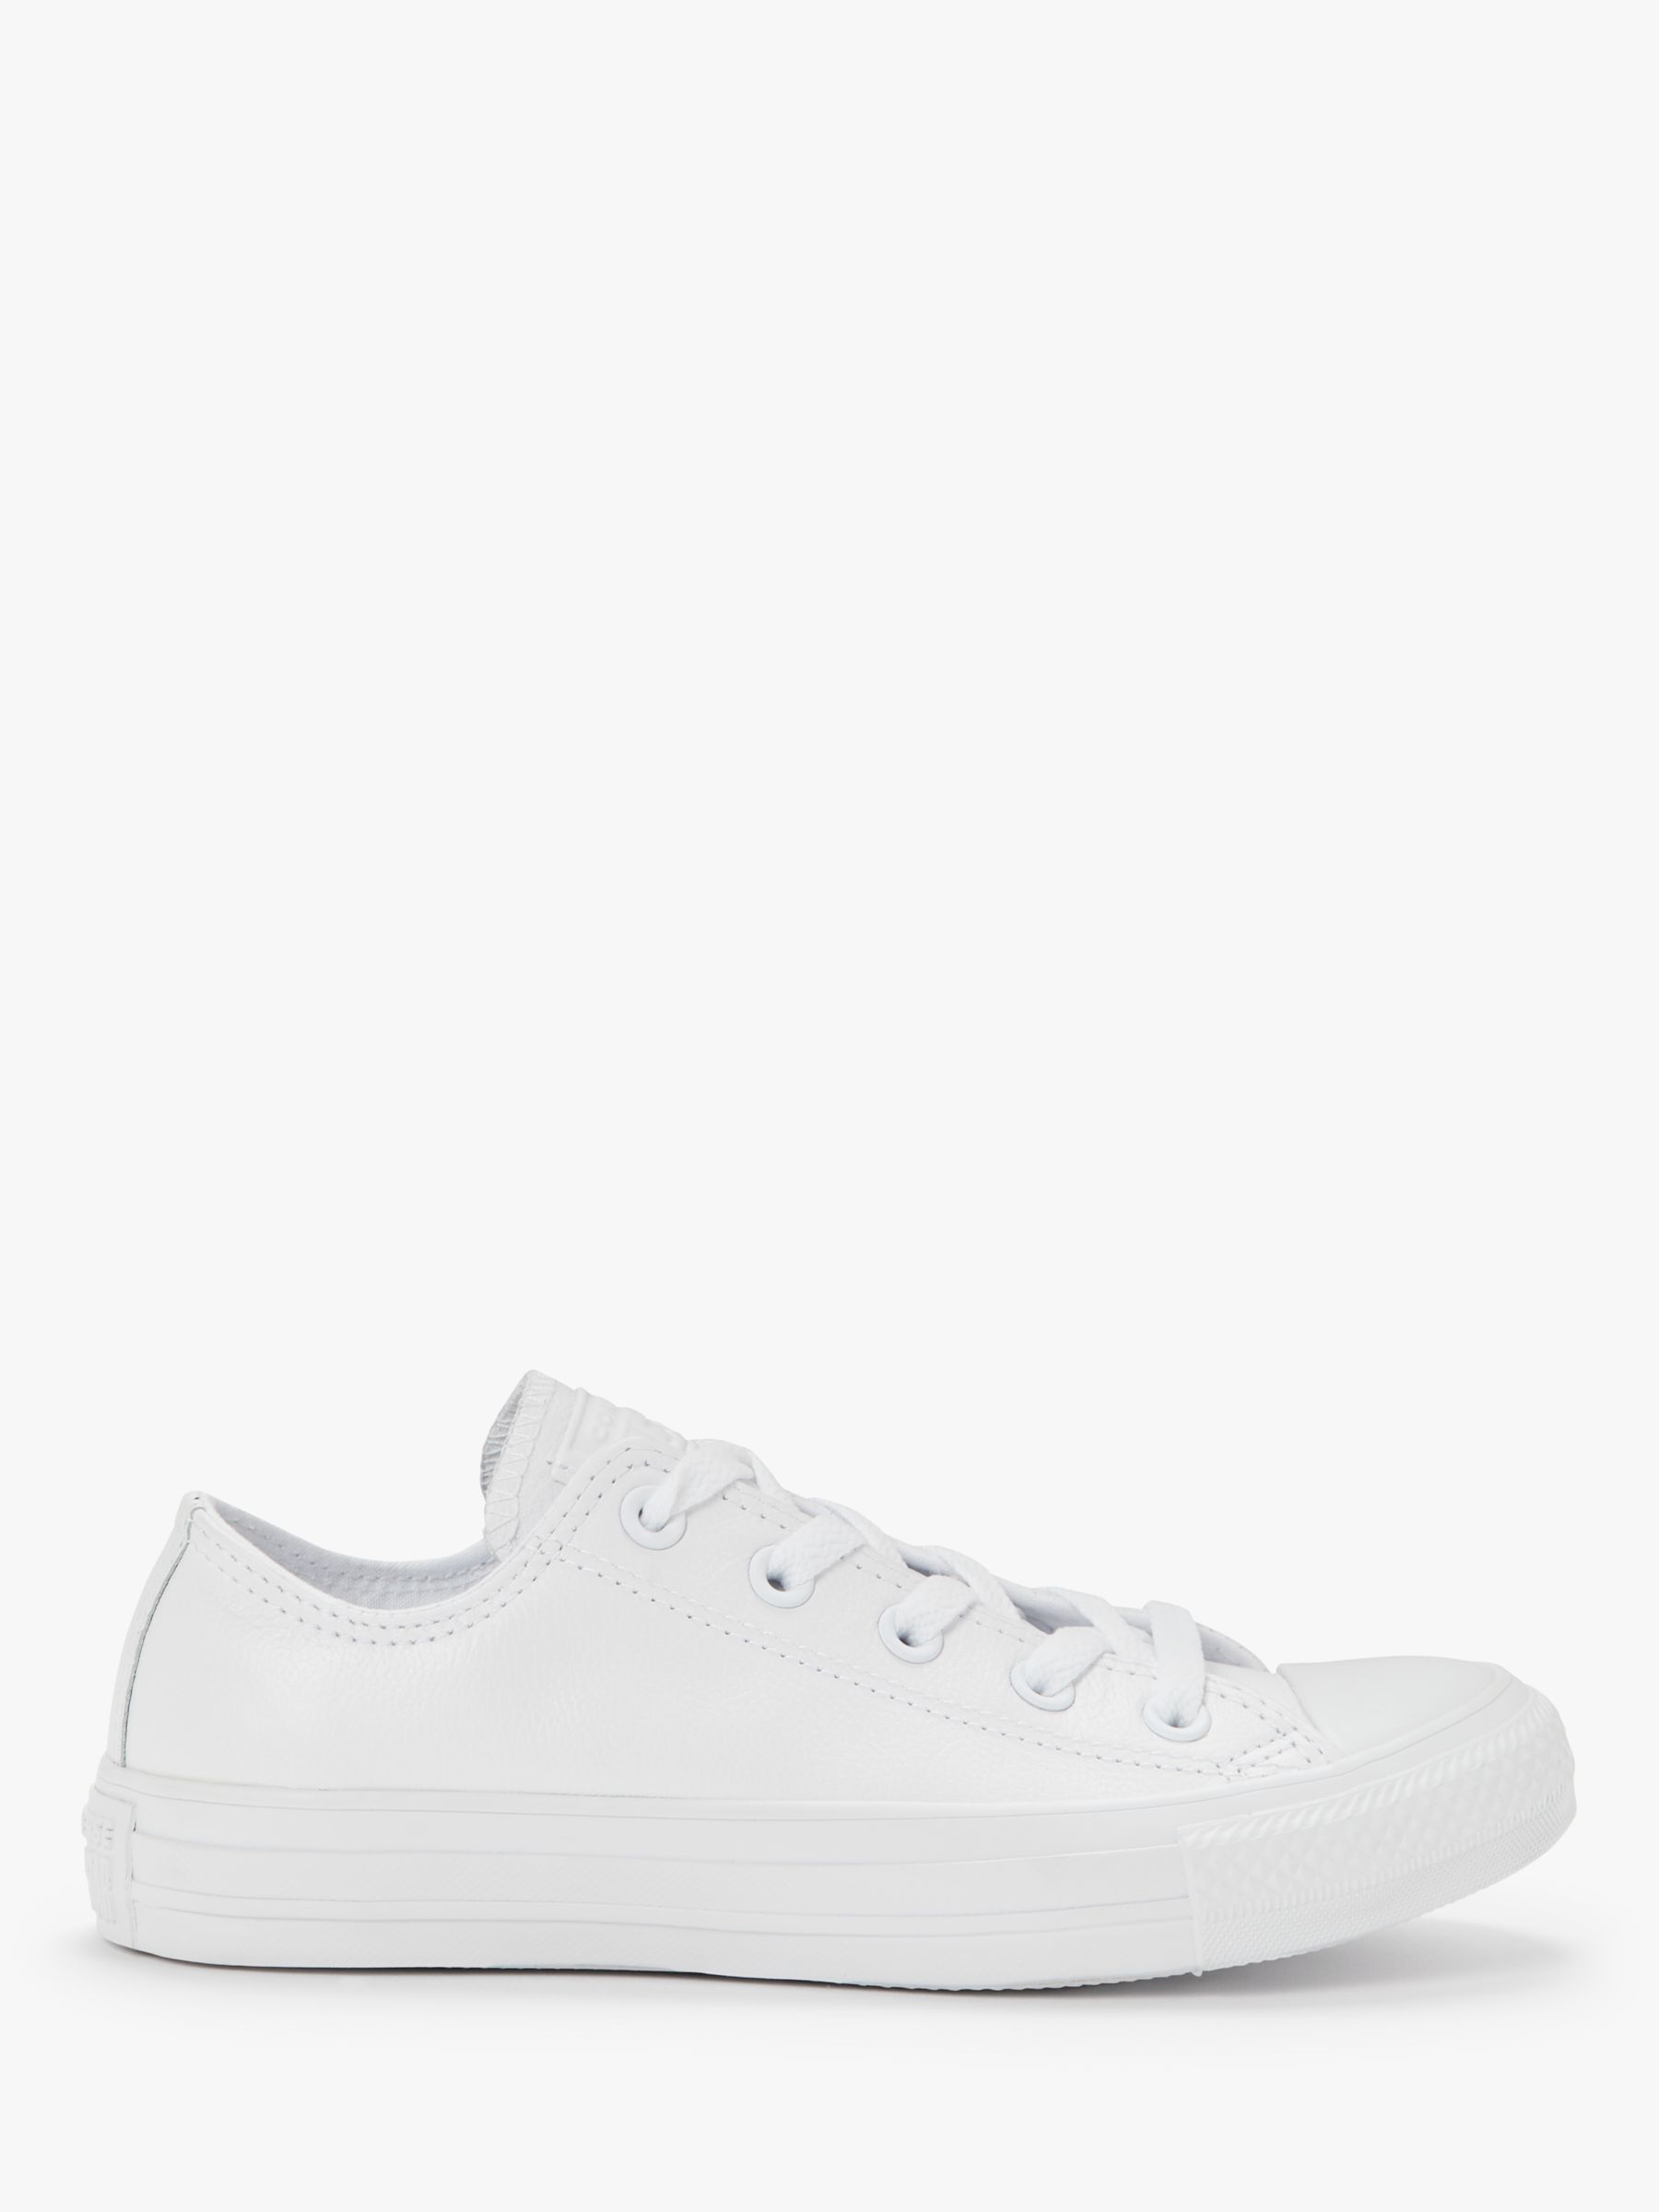 Converse Chuck Taylor All Star Ox Leather Trainers, White at John Lewis \u0026  Partners